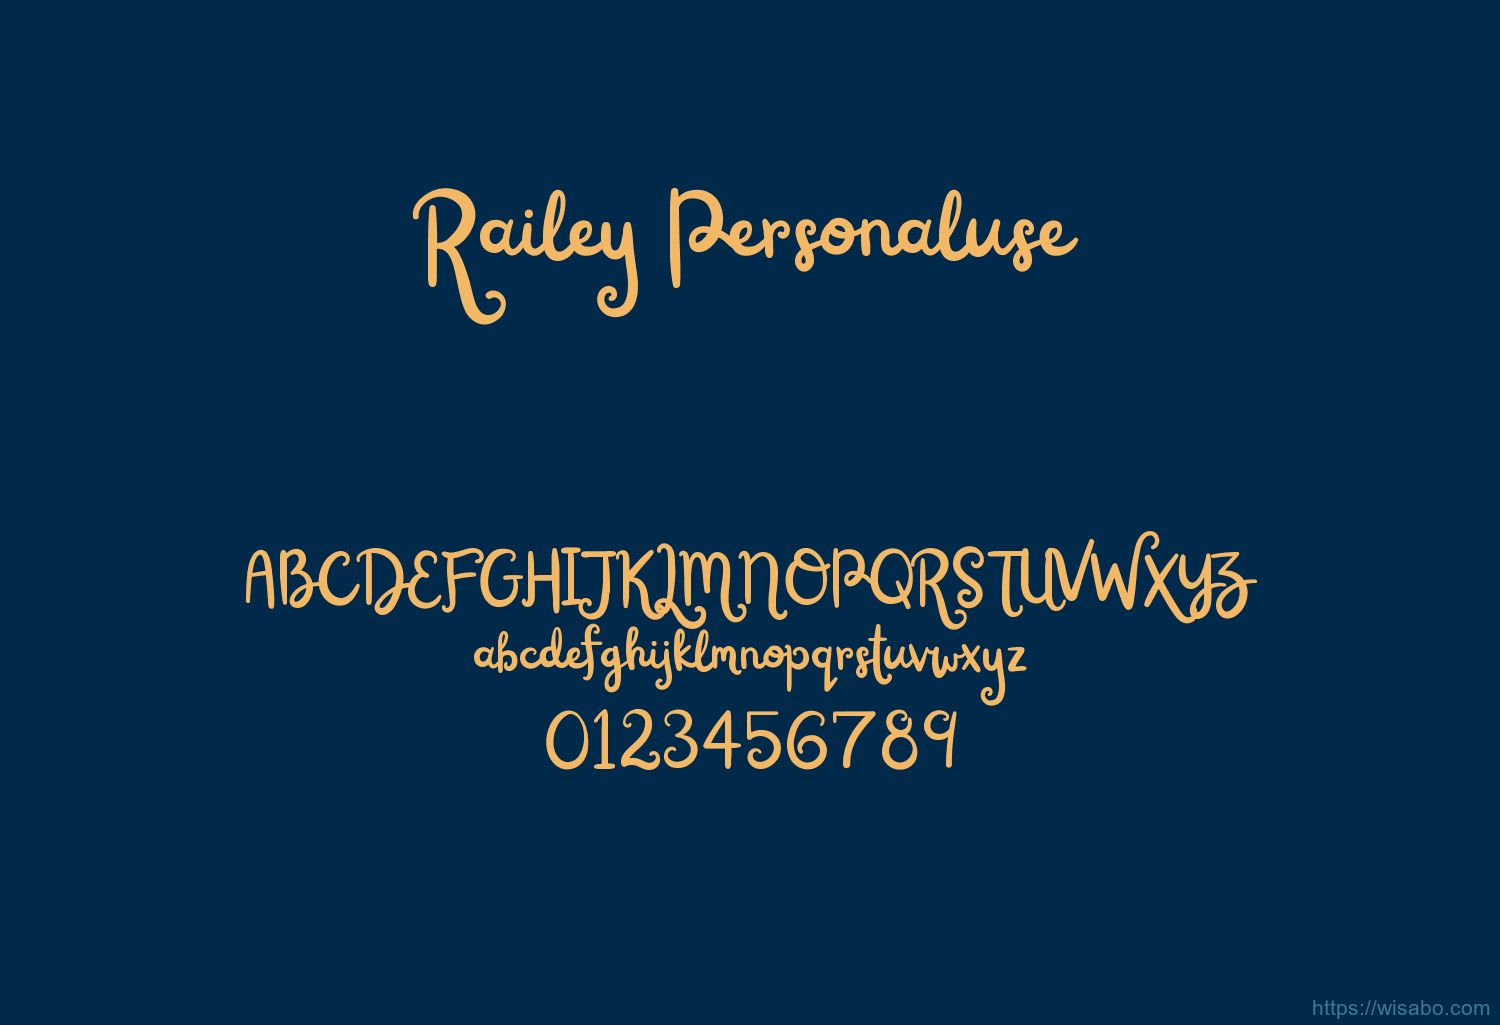 Railey Personaluse